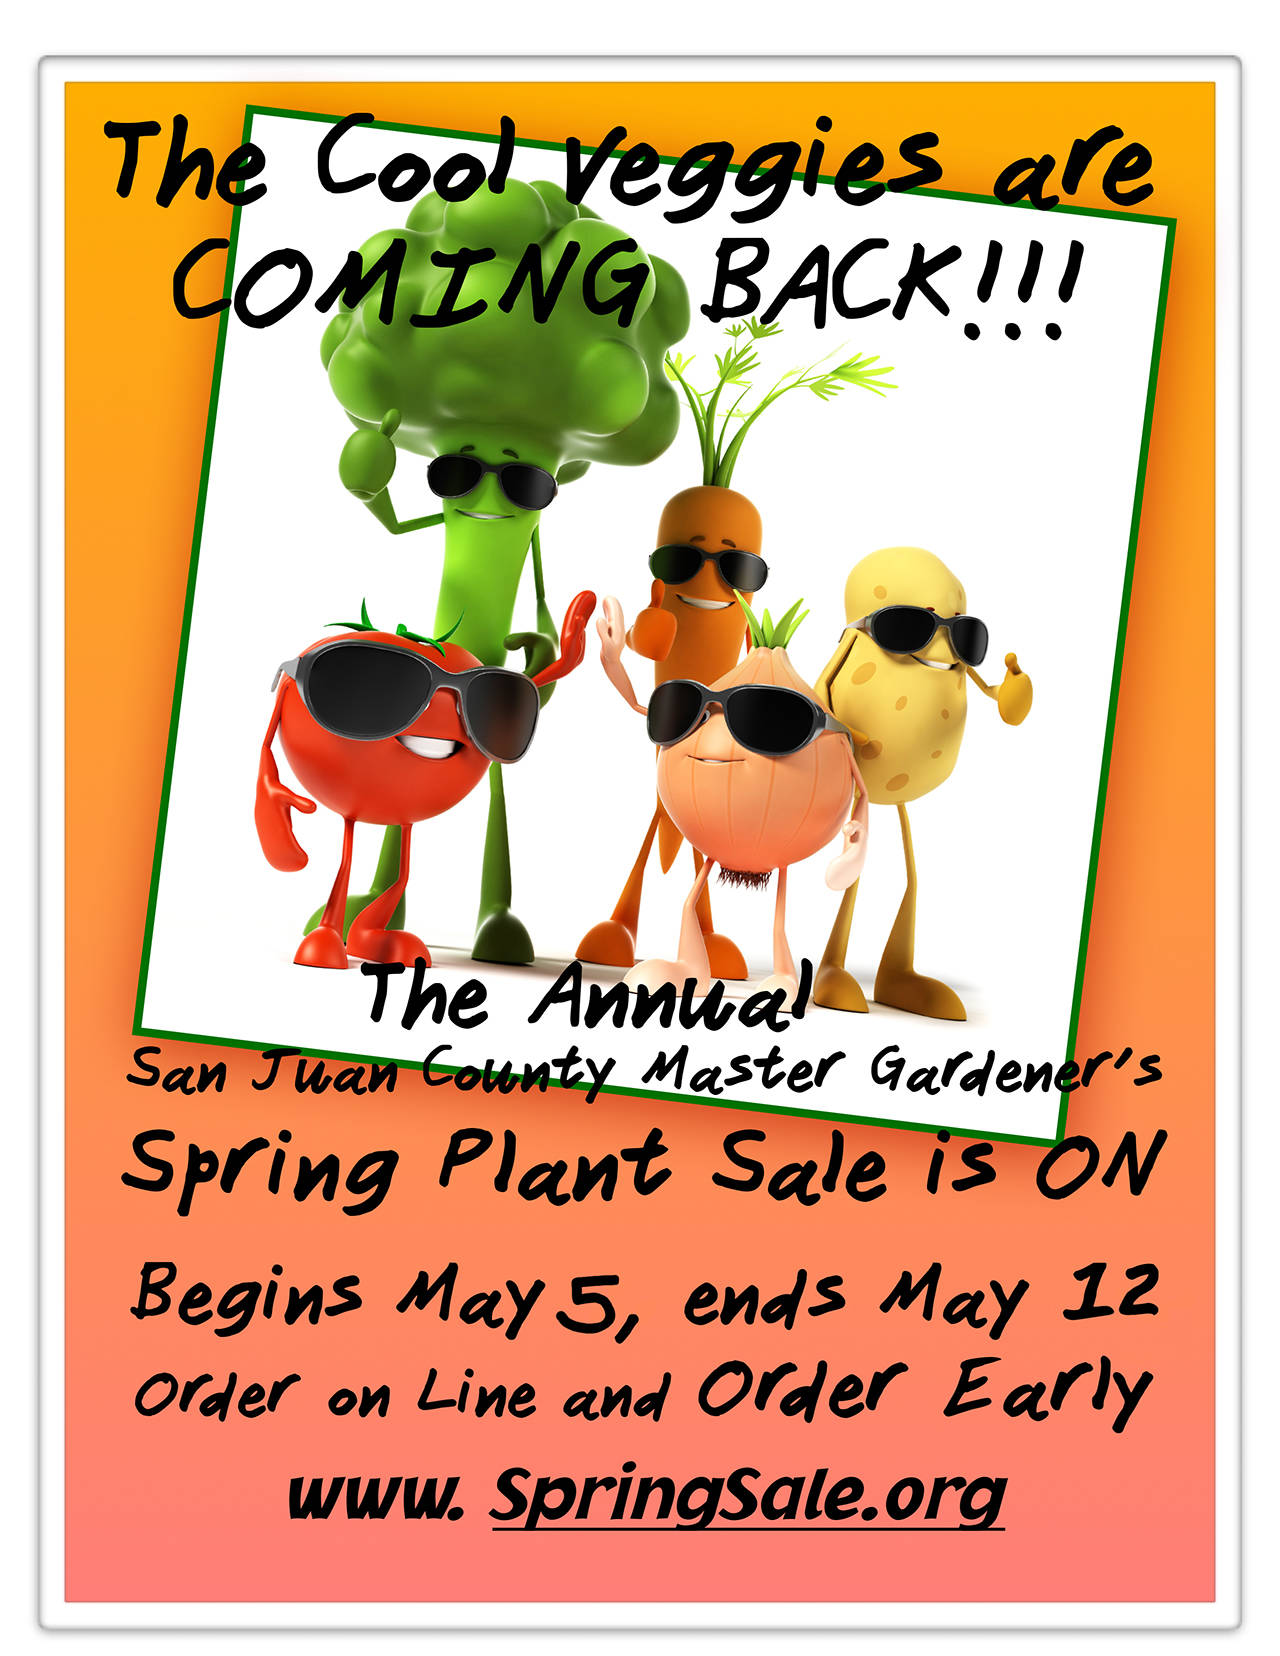 Master Gardeners sprint plant sale is online, May 5-12